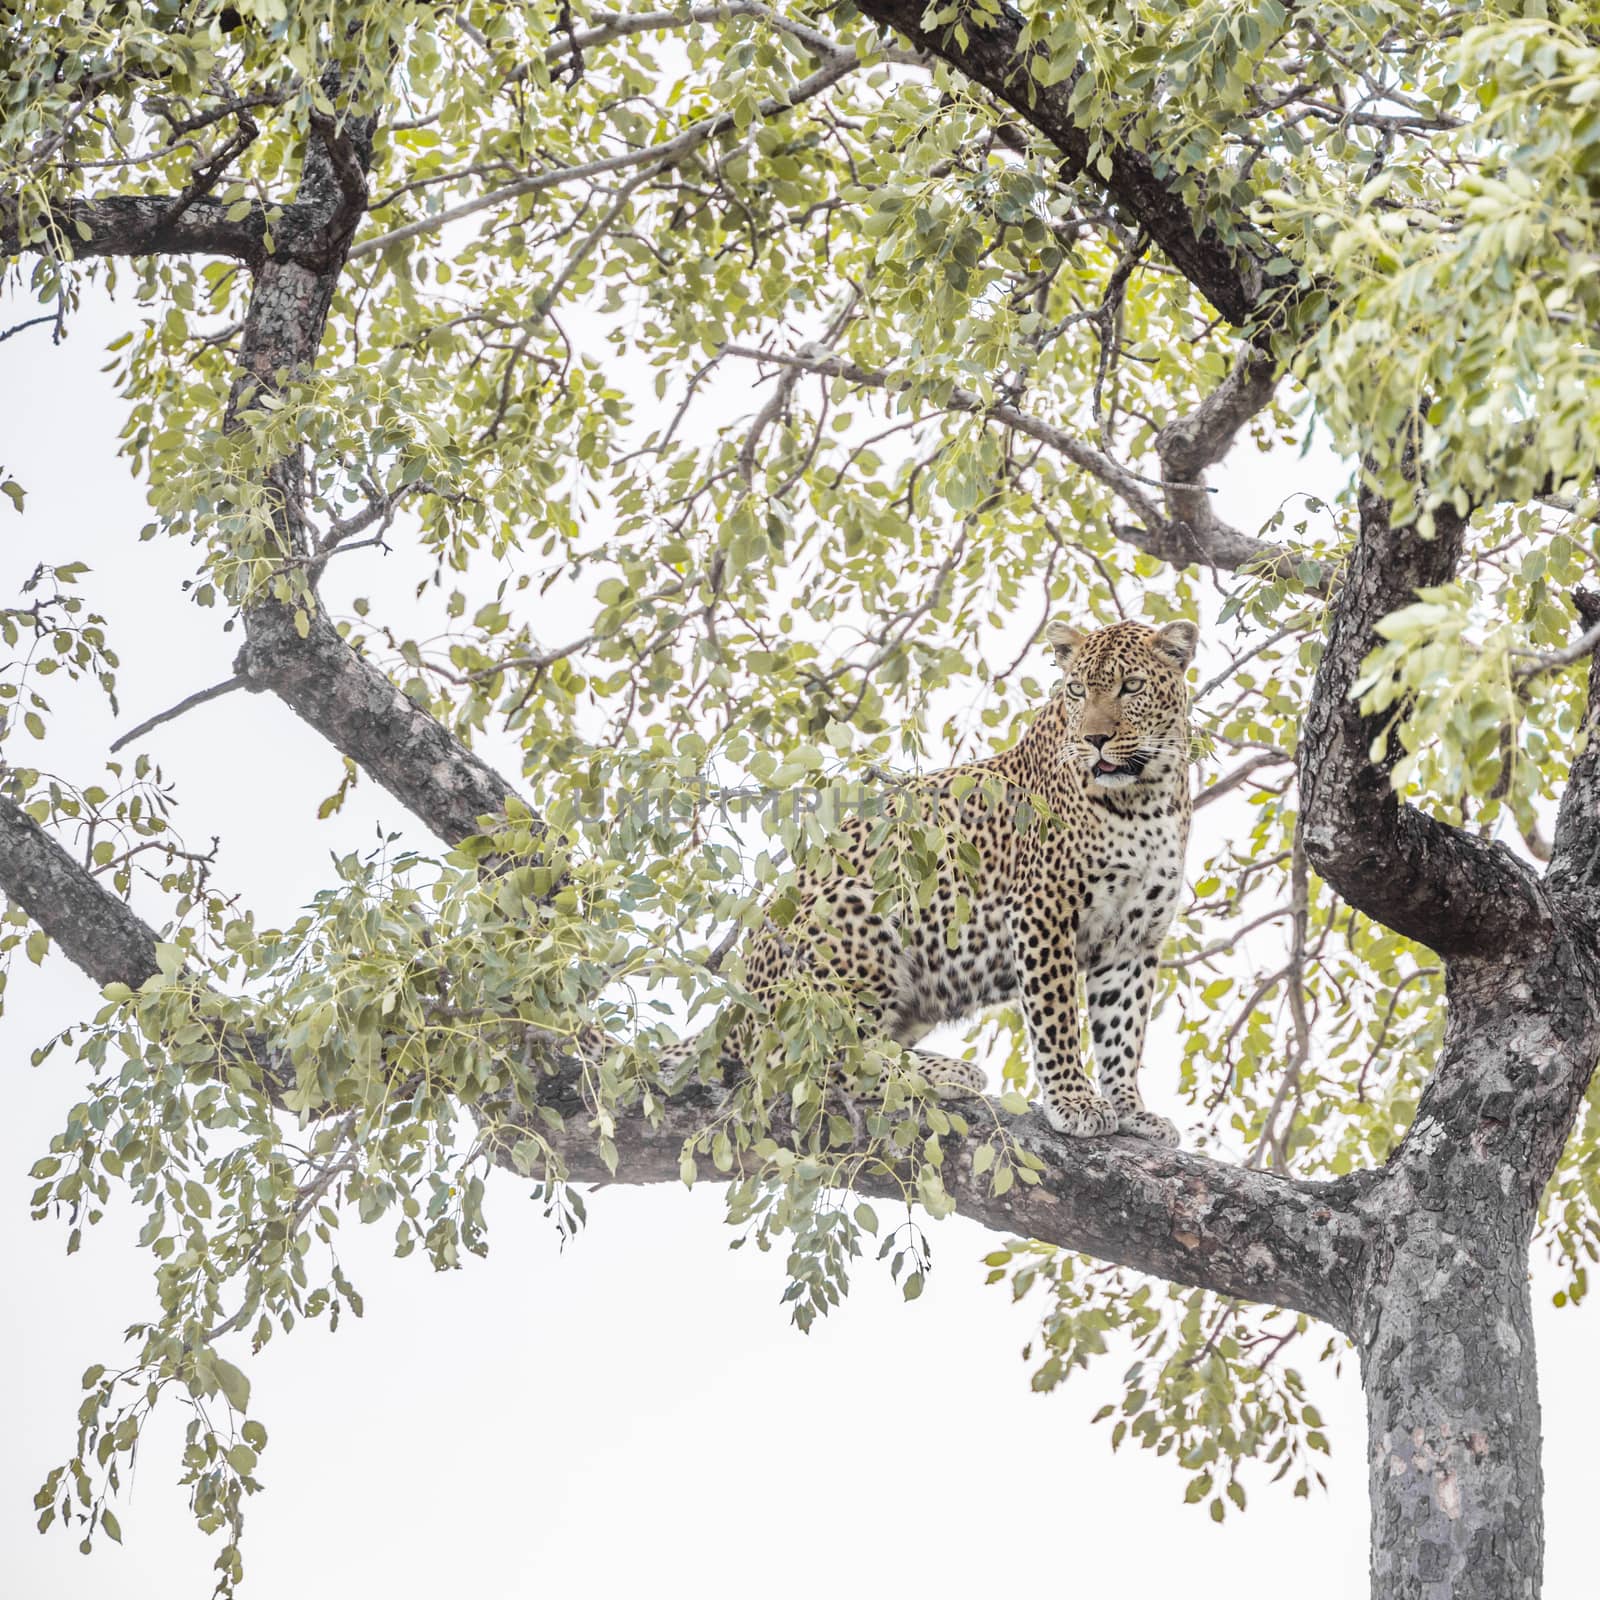 Leopard sitting in a tree in Kruger National park, South Africa ; Specie Panthera pardus family of Felidae